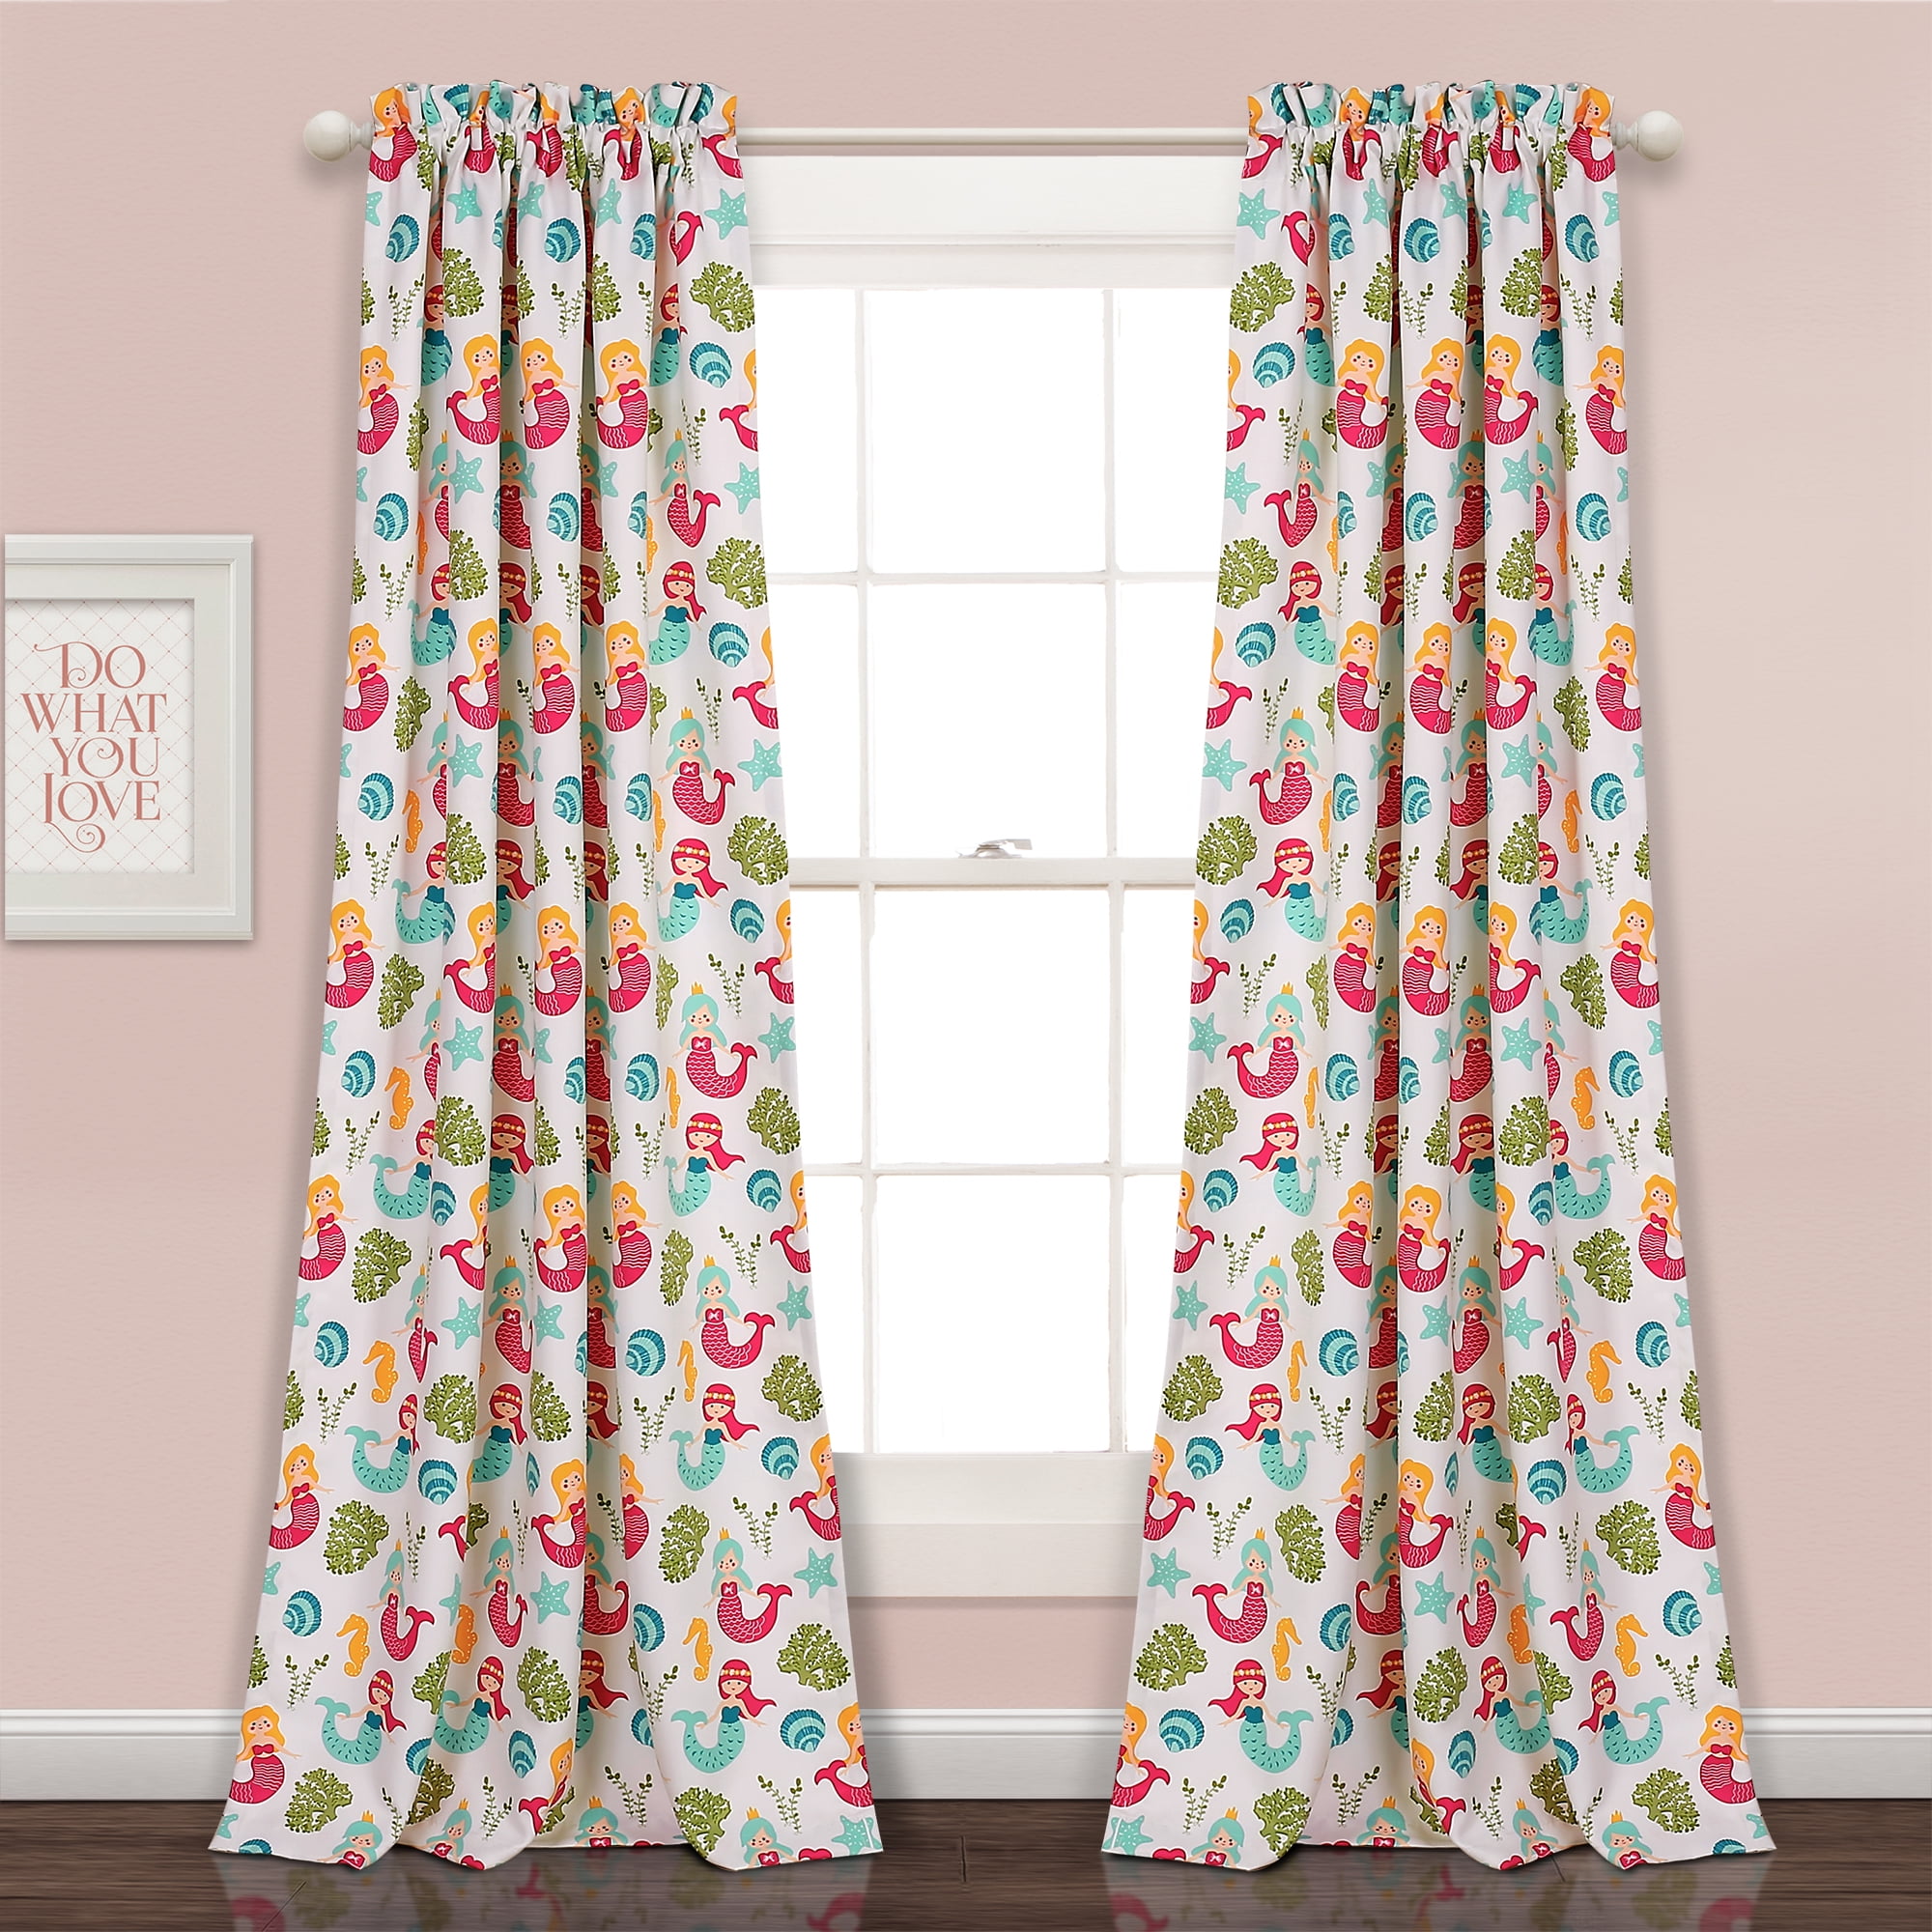 Details about   Cactus Curtains Living Room Window Curtain Drapes Bedroom Kitchen Decor 2 Panels 